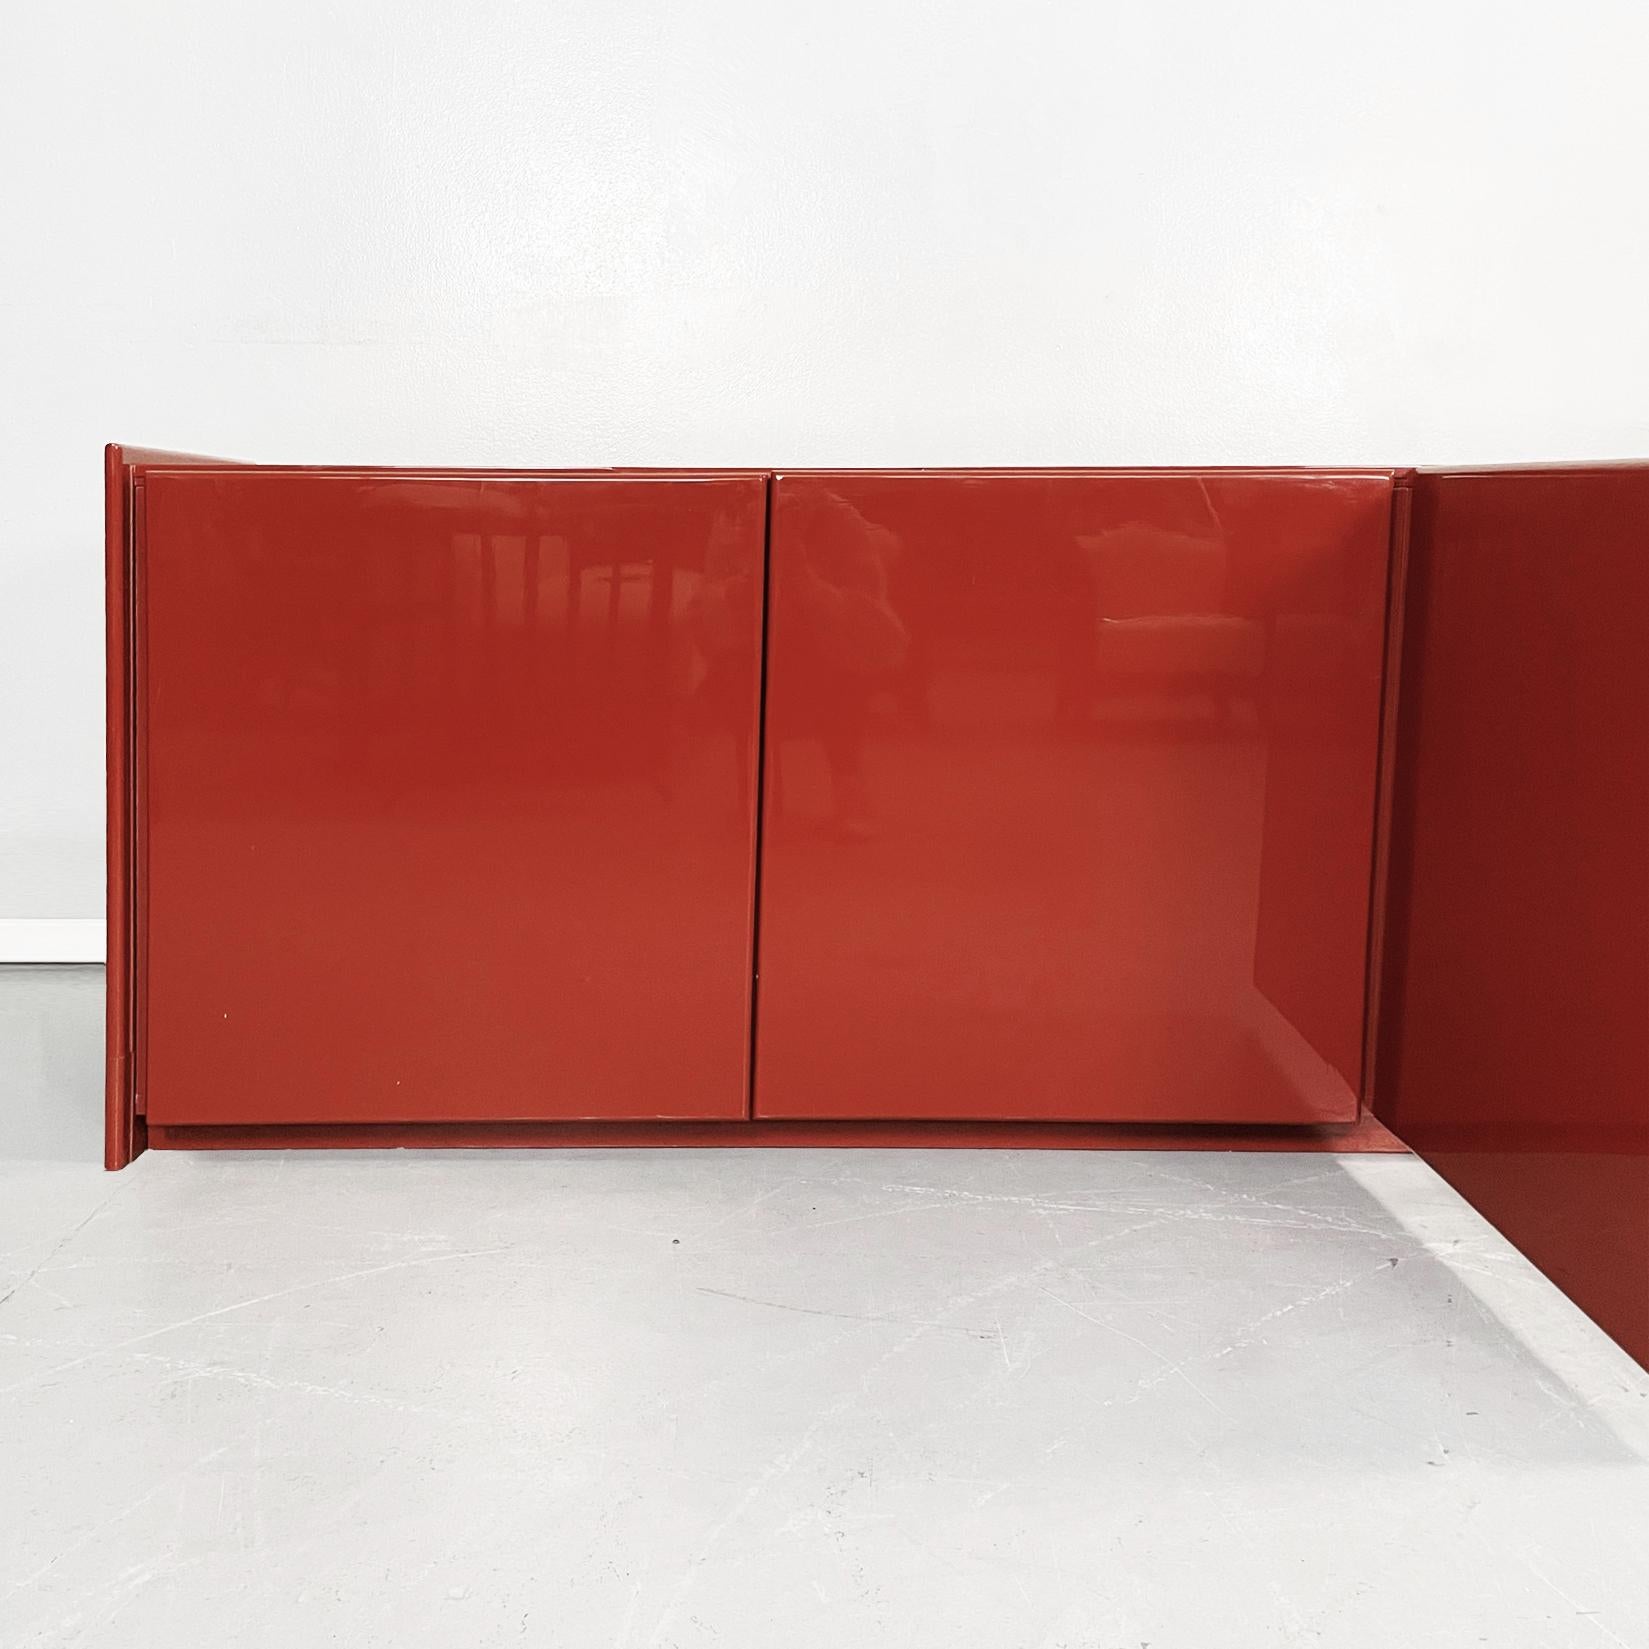 Italian Mid-Century Modern Rectangular Red Lacquered Solid Wood Sideboard, 1980s For Sale 3